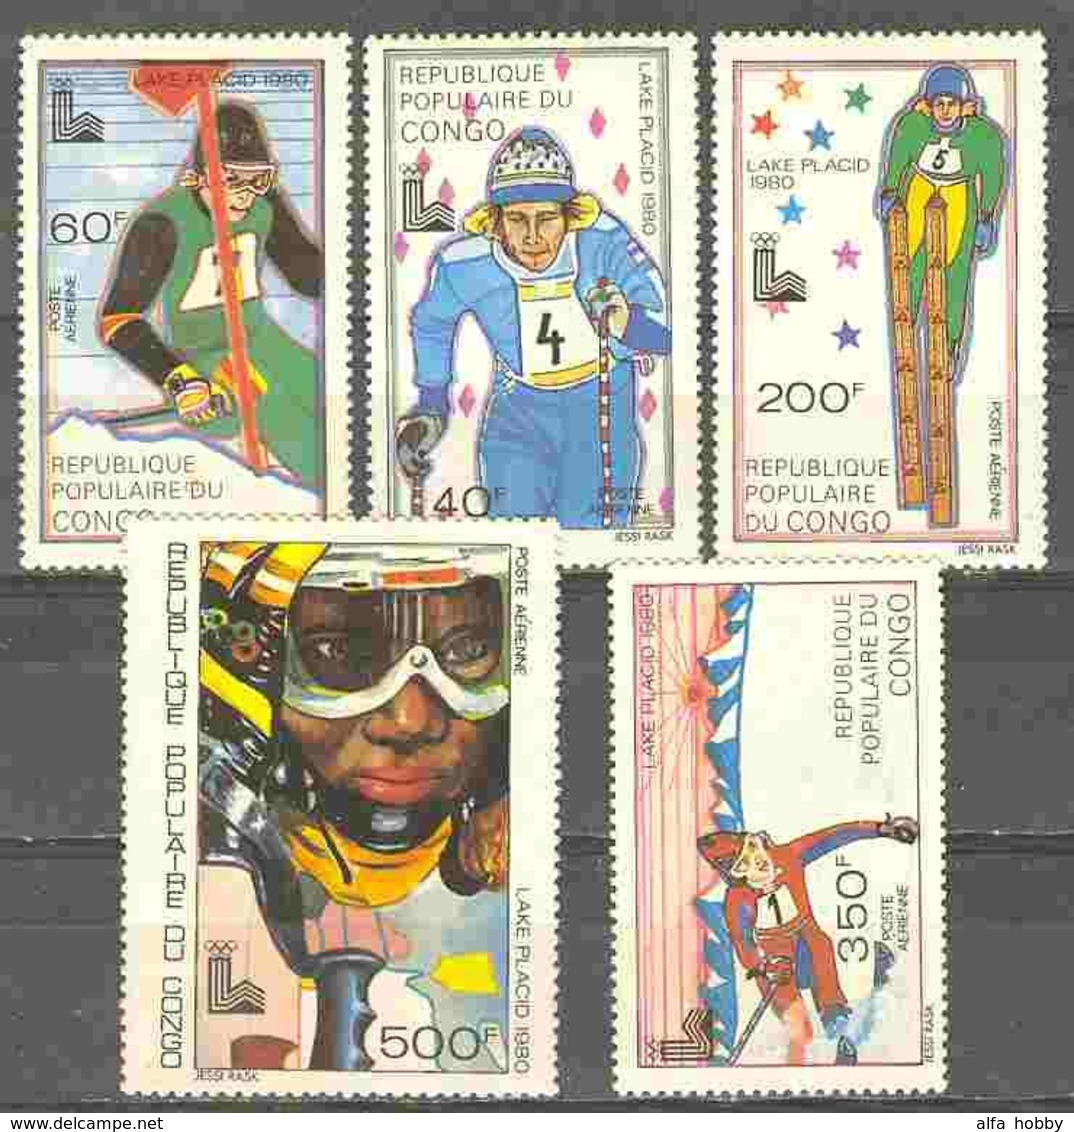 Kongo Congo, Winter Olympic Games, 1980, 5 Stamps - Hiver 1980: Lake Placid